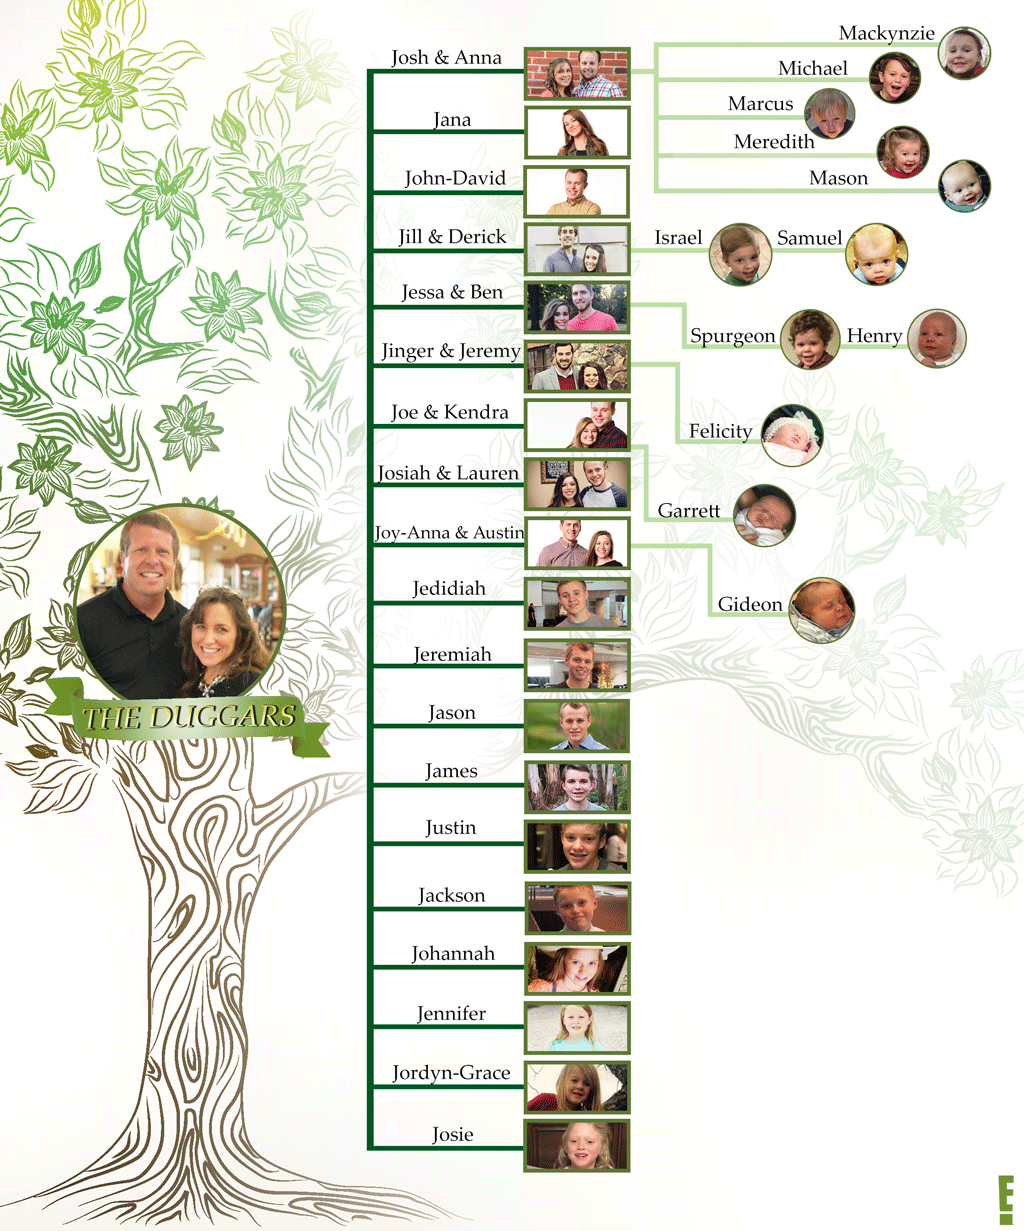 The Duggar Family Tree: A Complete Breakdown of the Ever ...